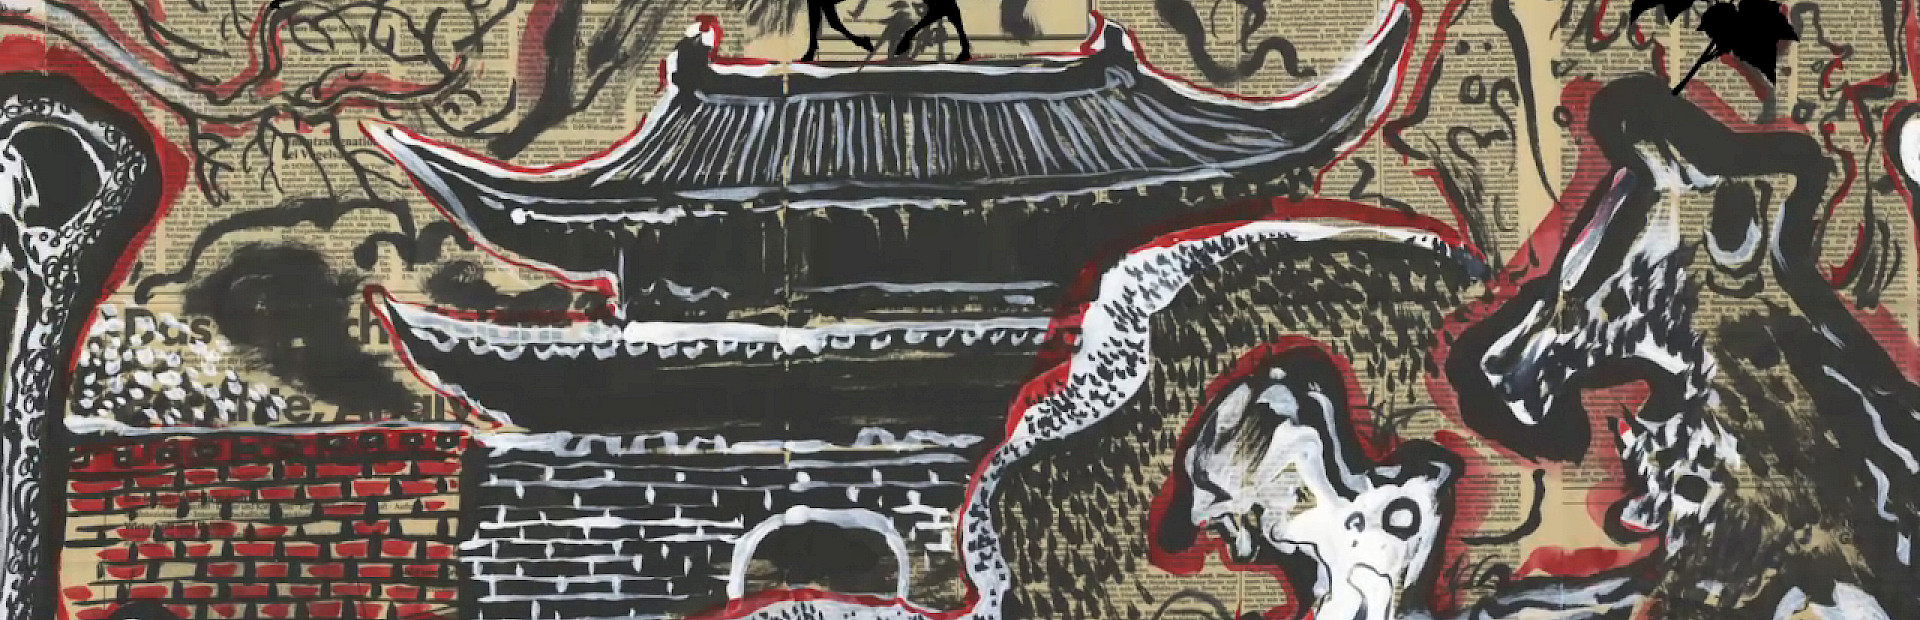 Video still of Sun Xun's "Tears of Chiwen" showing a Chinese building, abstract waves, a brick wall, and other black, white, and red figures on a background of yellowed newspaper.